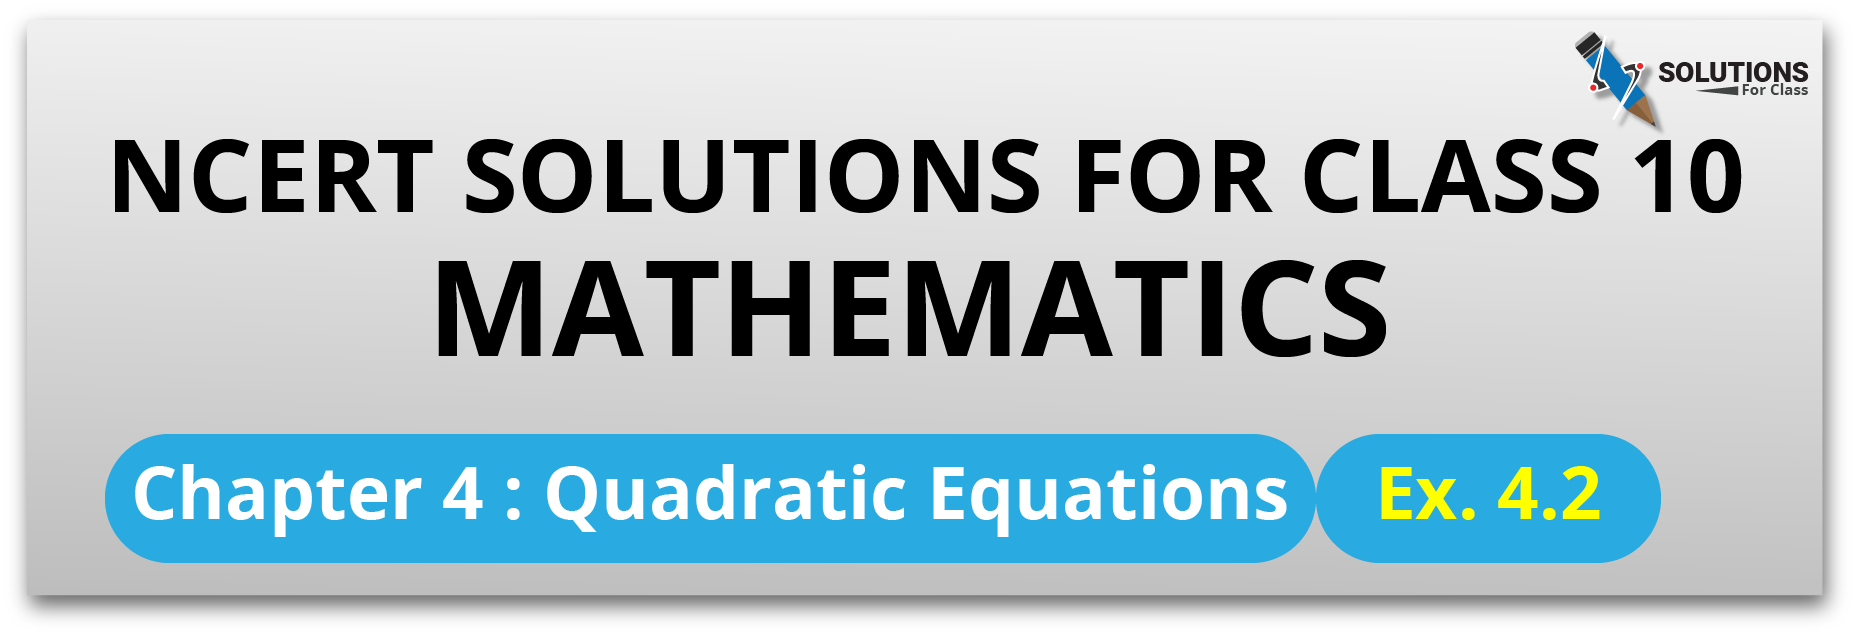 NCERT Solution For Class 10, Maths, Quadratic Equations, Exercise 4.2